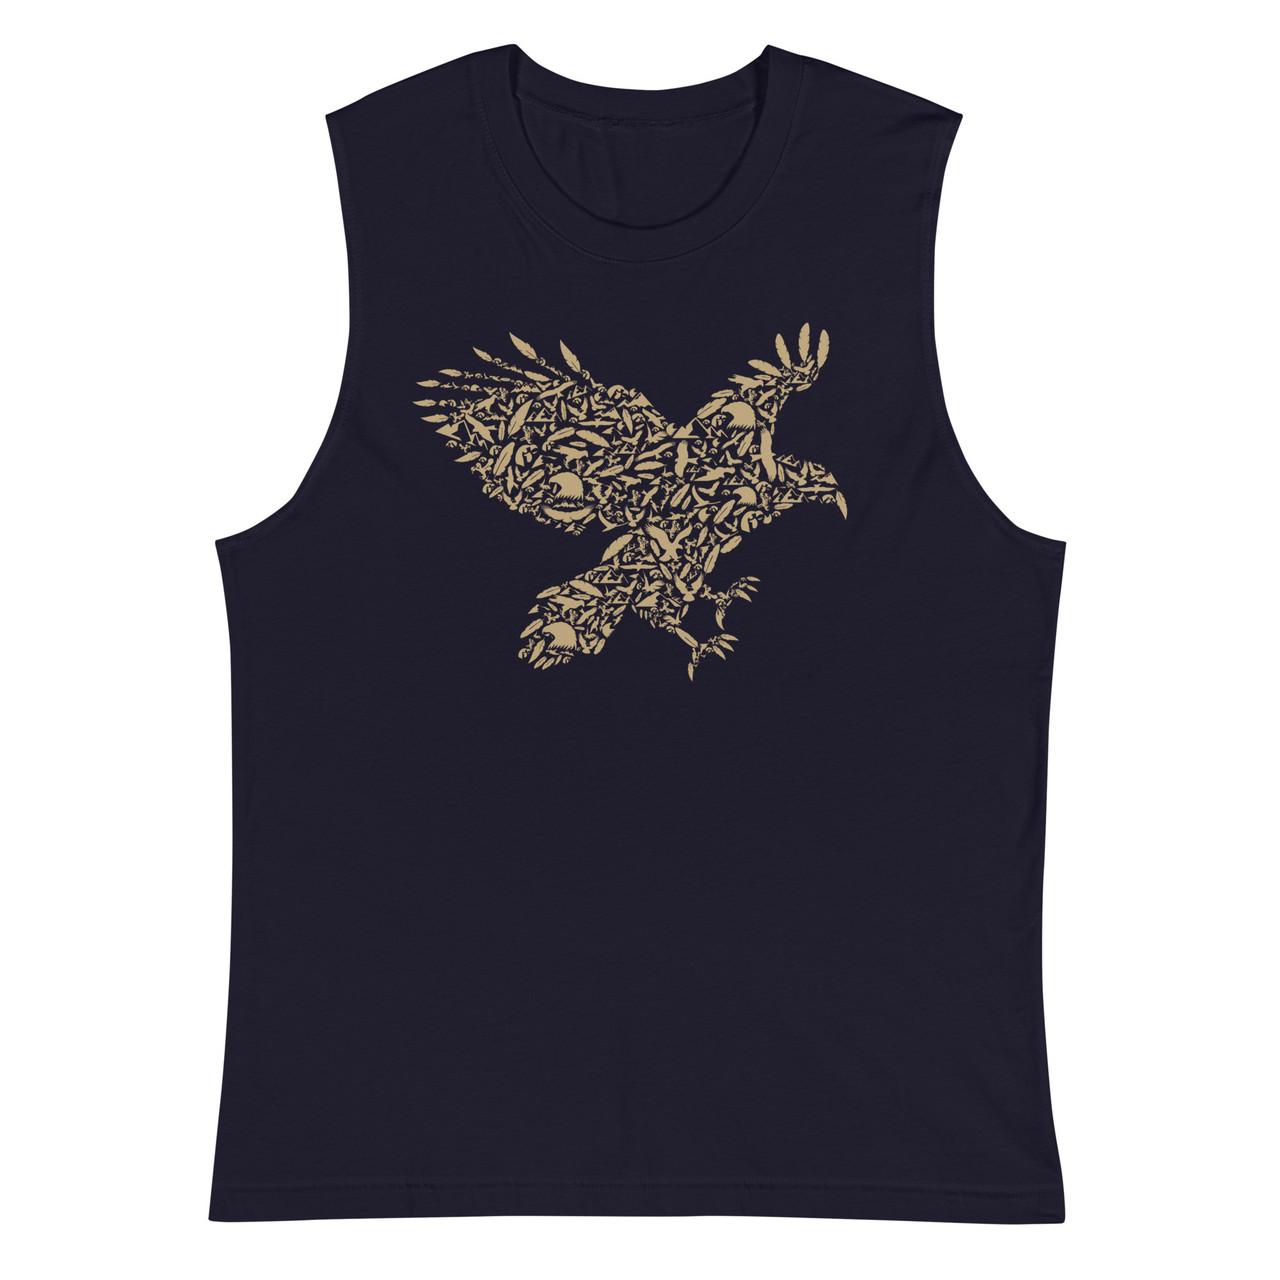 Eagle Feather Unisex Muscle Shirt - Bella + Canvas 3483 